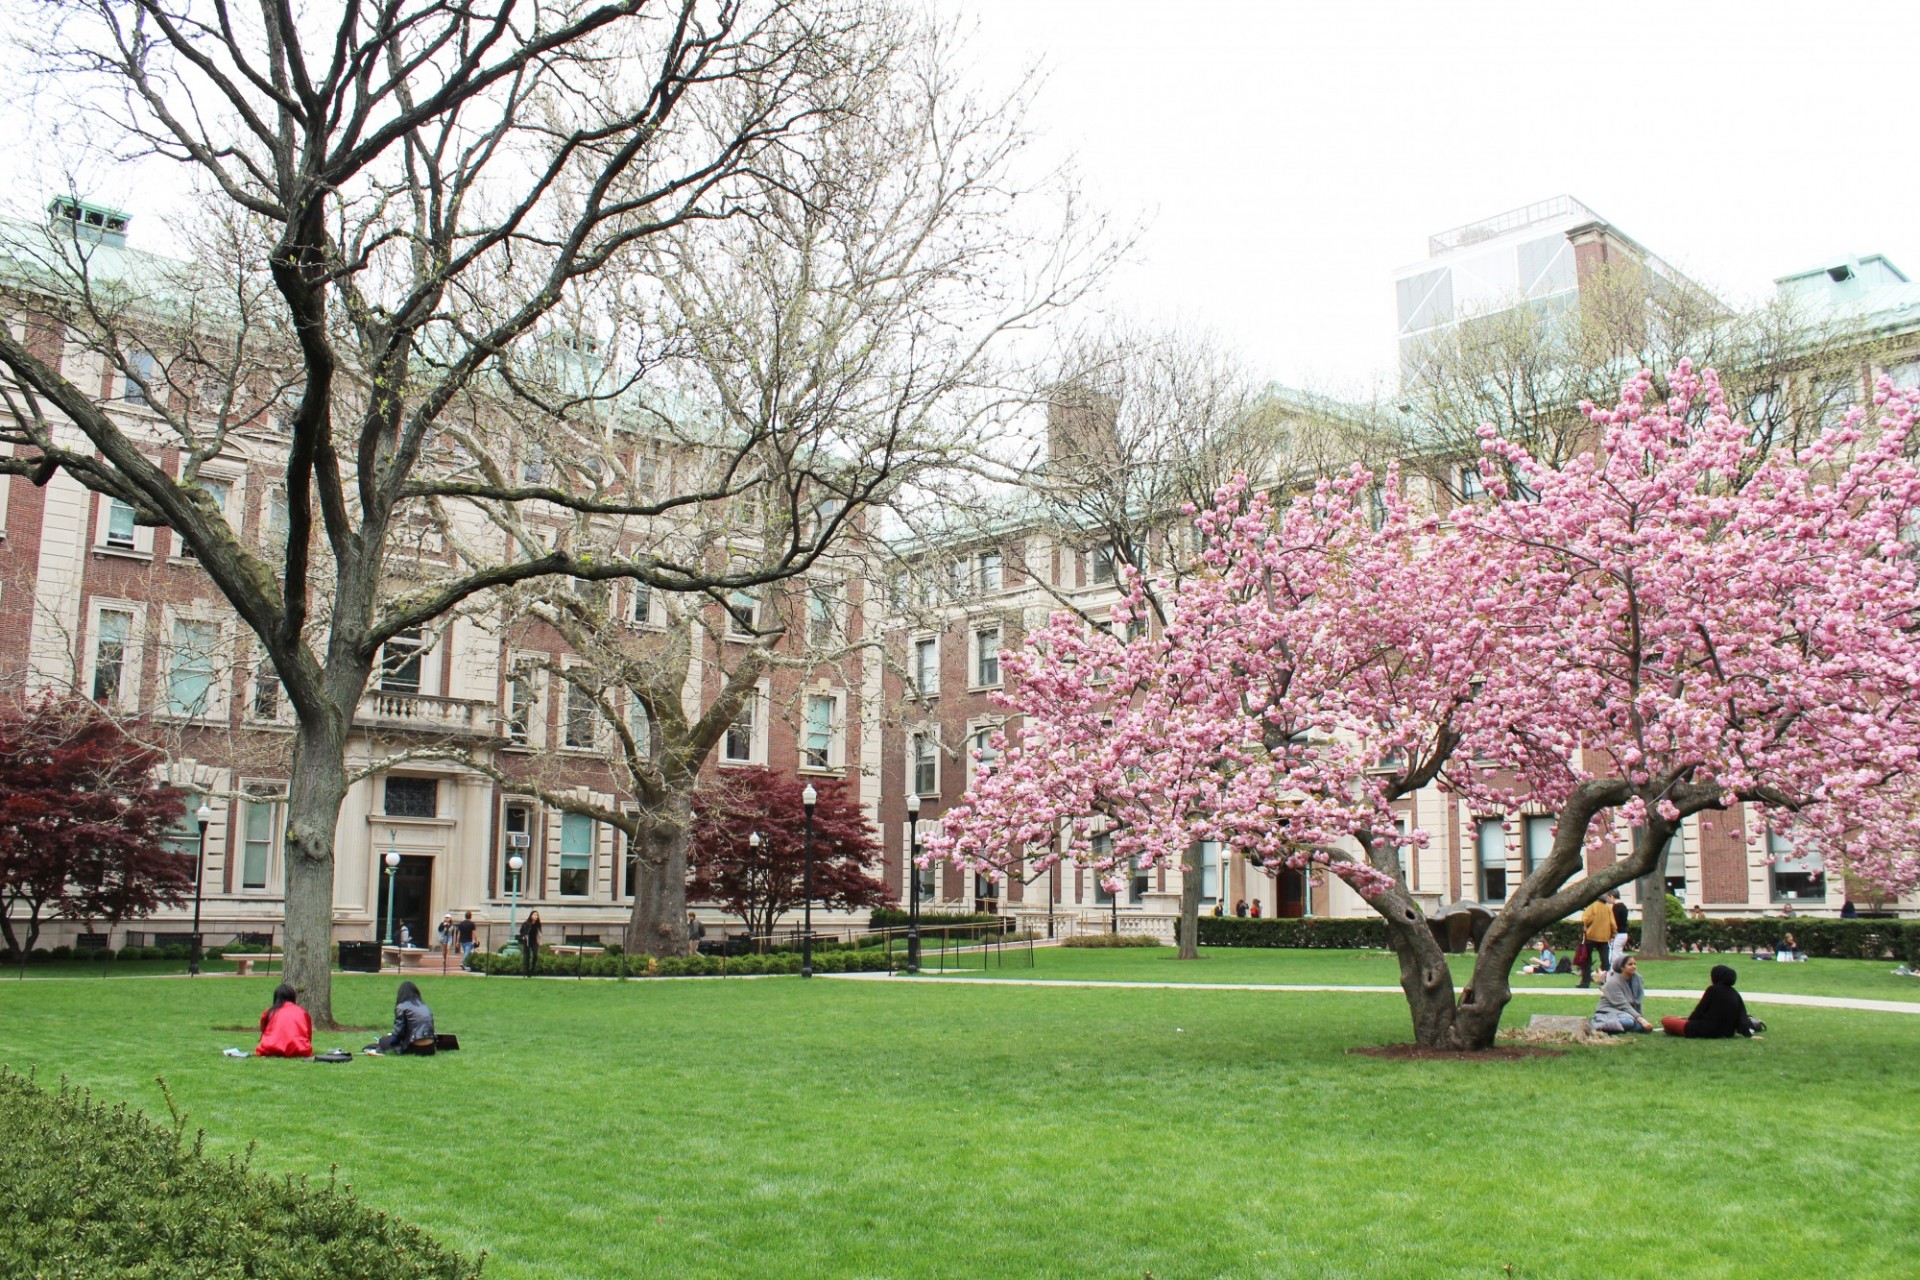 The Mathematics lawn during spring, with no leaves on the large sycamore tree, and a flowering cherry blossom tree in bloom, with students sitting on the grass by the trees.